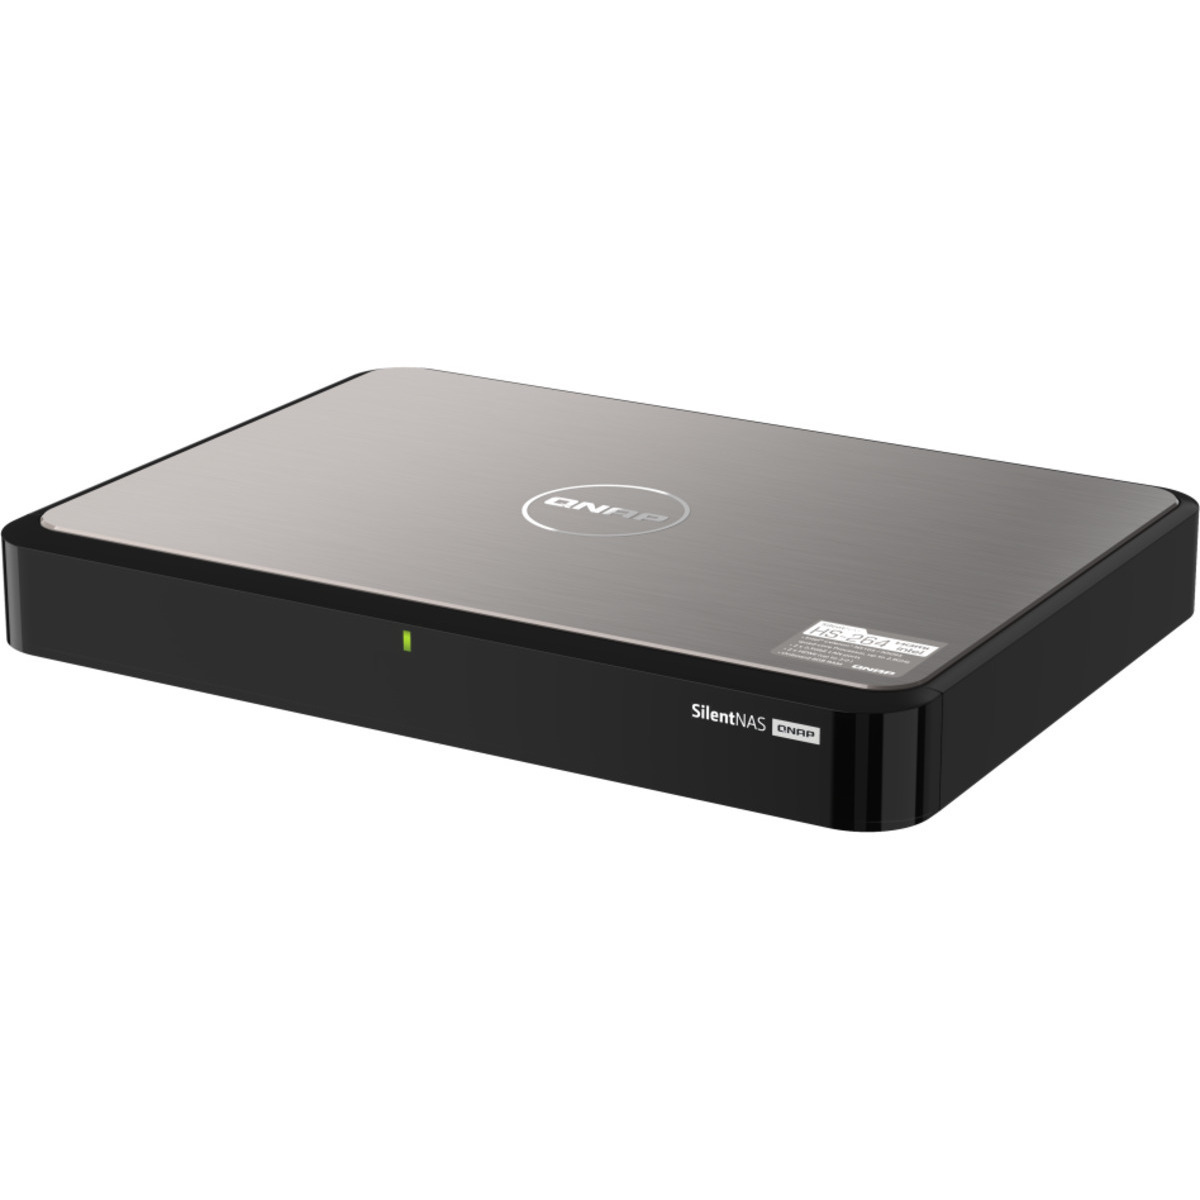 QNAP HS-264 4tb 2-Bay Desktop Multimedia / Power User / Business NAS - Network Attached Storage Device 1x4tb Western Digital Red SA500 WDS400T1R0A 2.5 560/530MB/s SATA 6Gb/s SSD NAS Class Drives Installed - Burn-In Tested HS-264